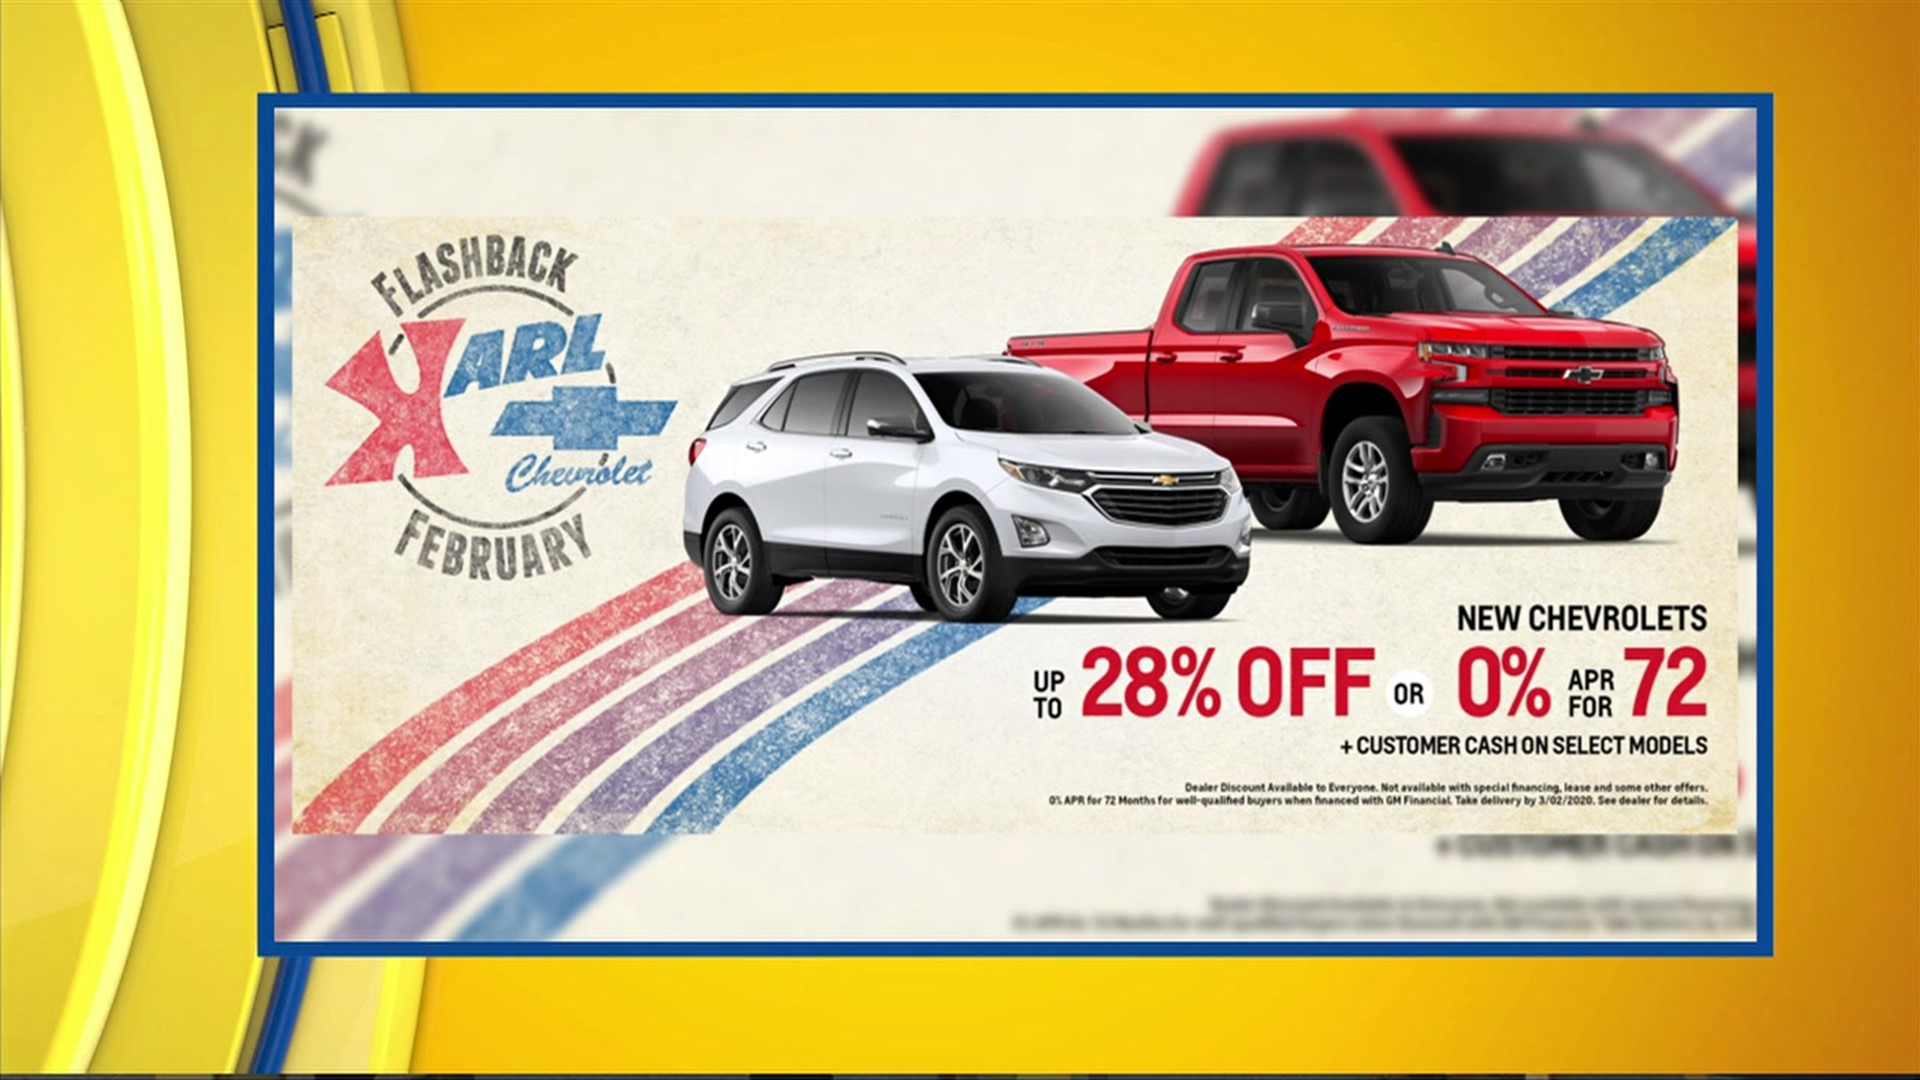 It's the month to save at Karl Chevrolet!